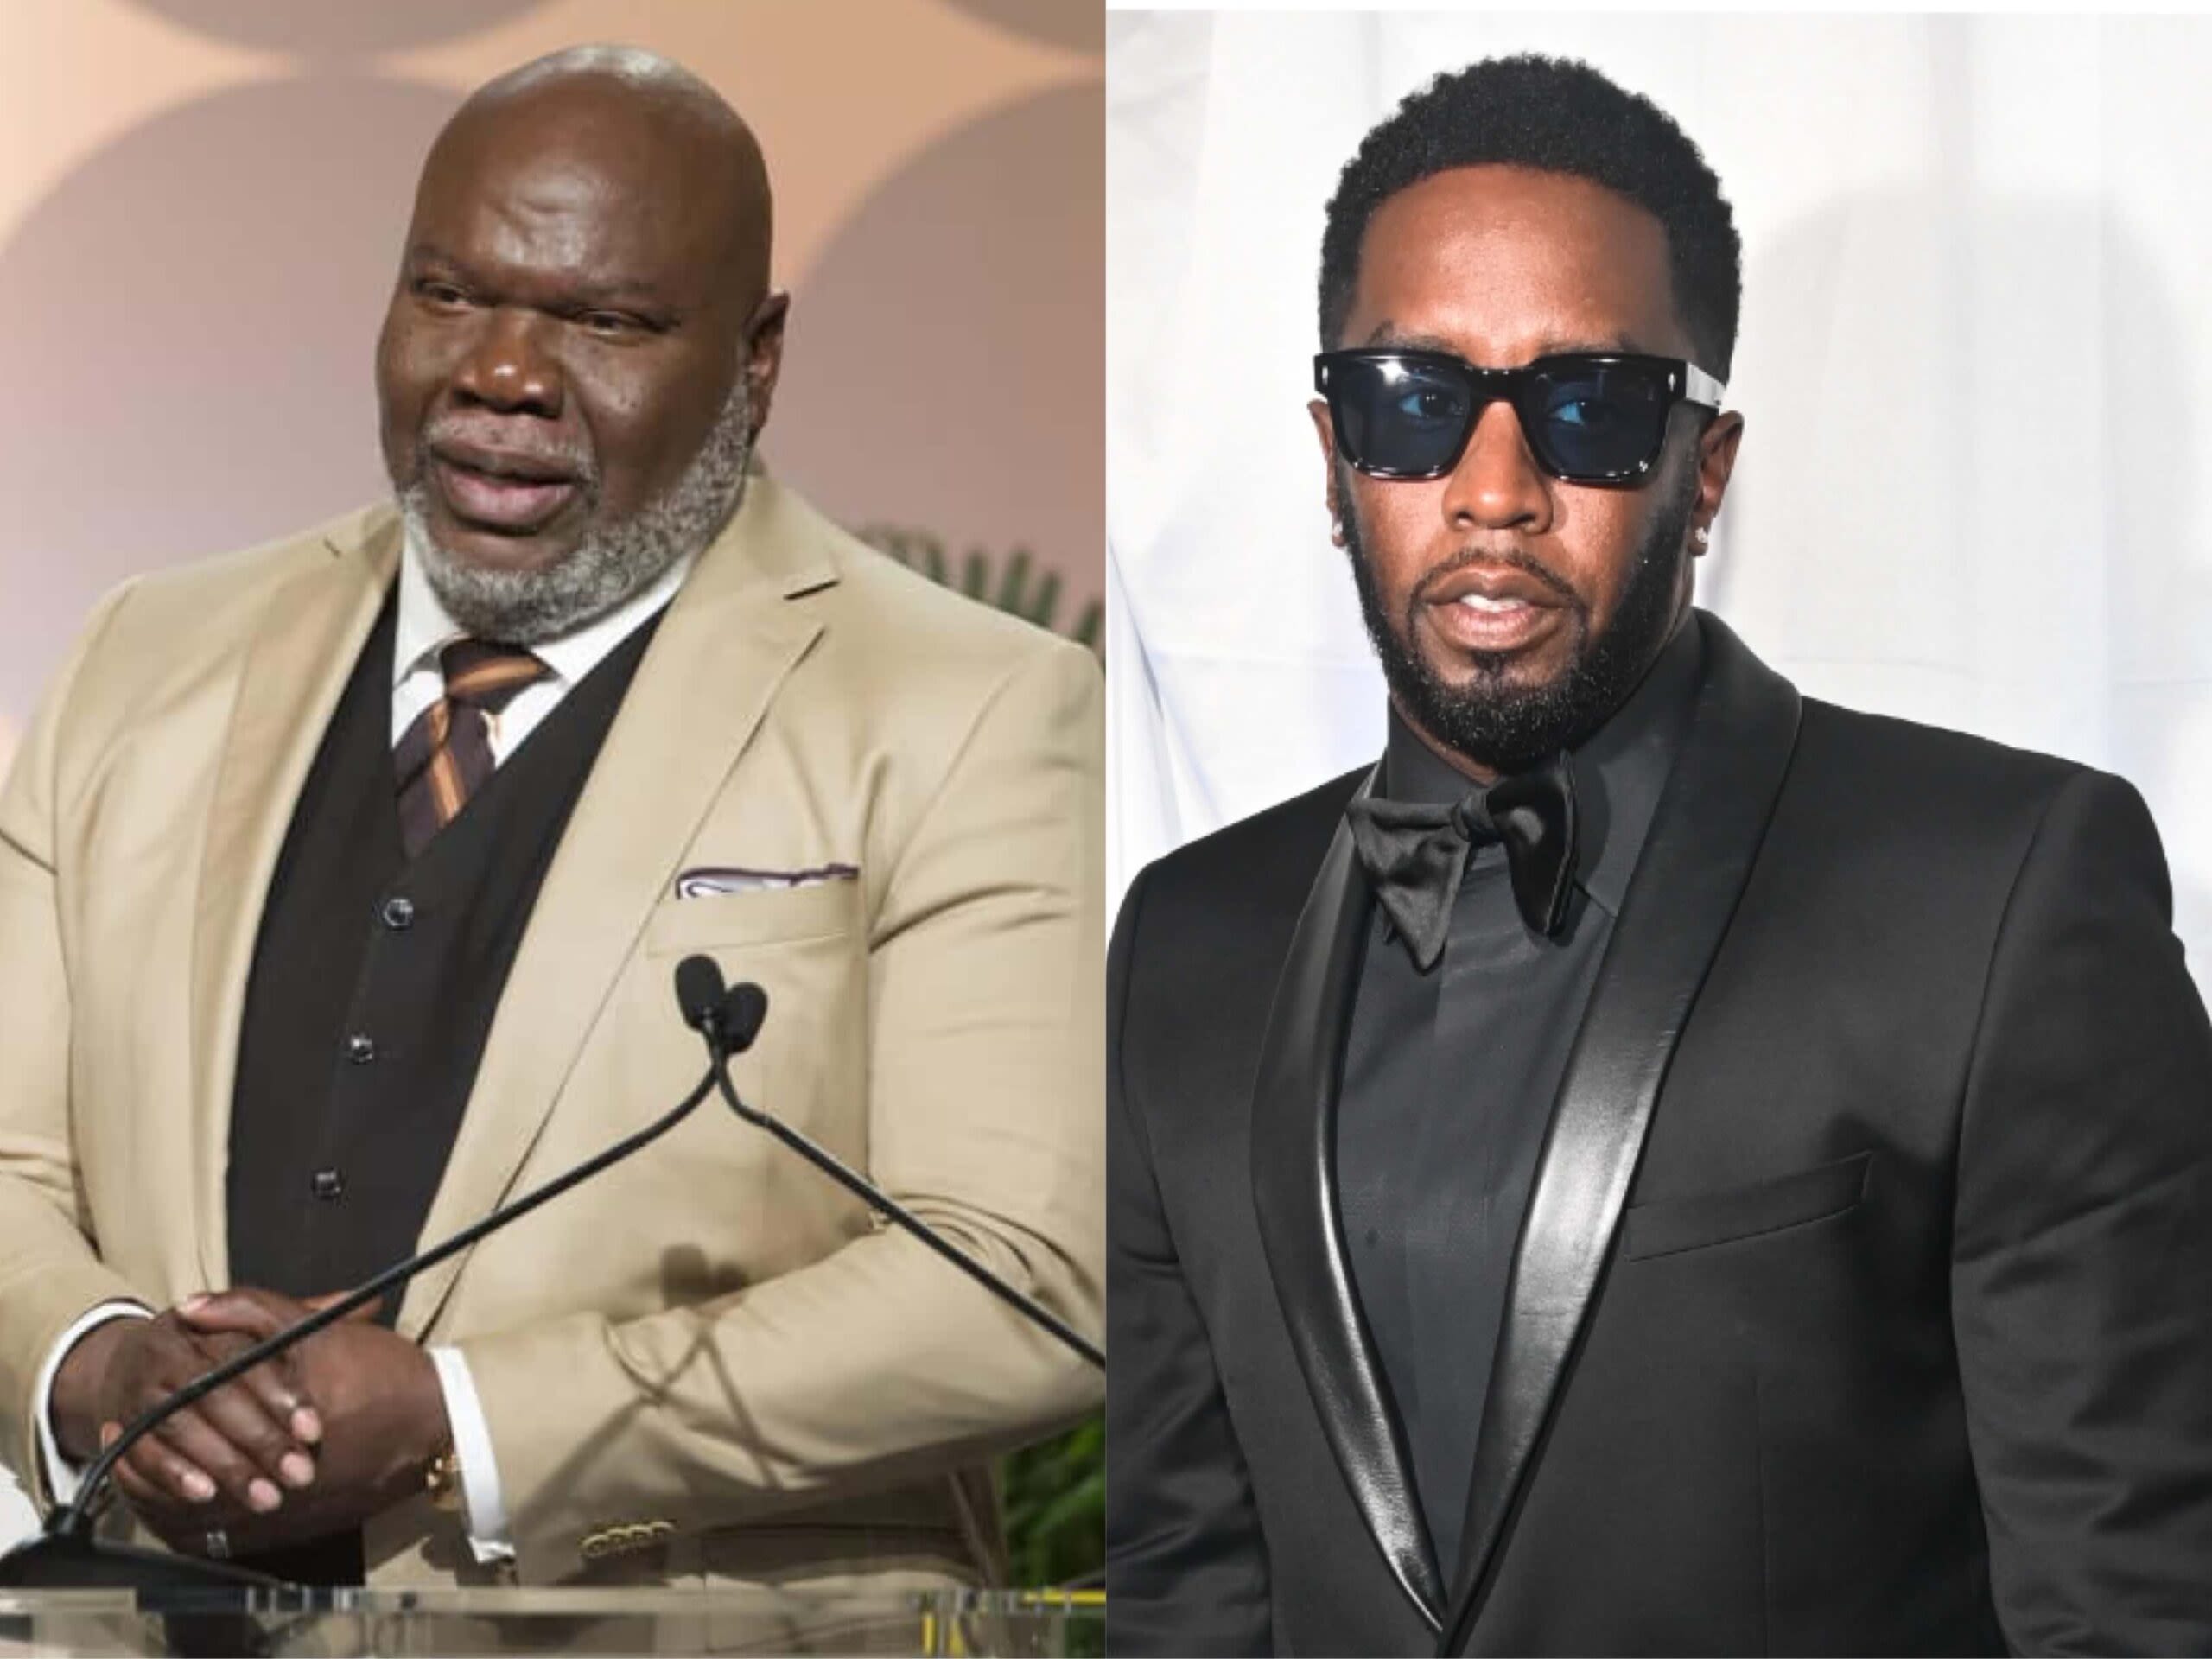 ‘Not Mr. Swallowed Up’: Fans React to Diddy Posting Video Using Excerpt from One of Bishop T.D. Jakes’ Sermons